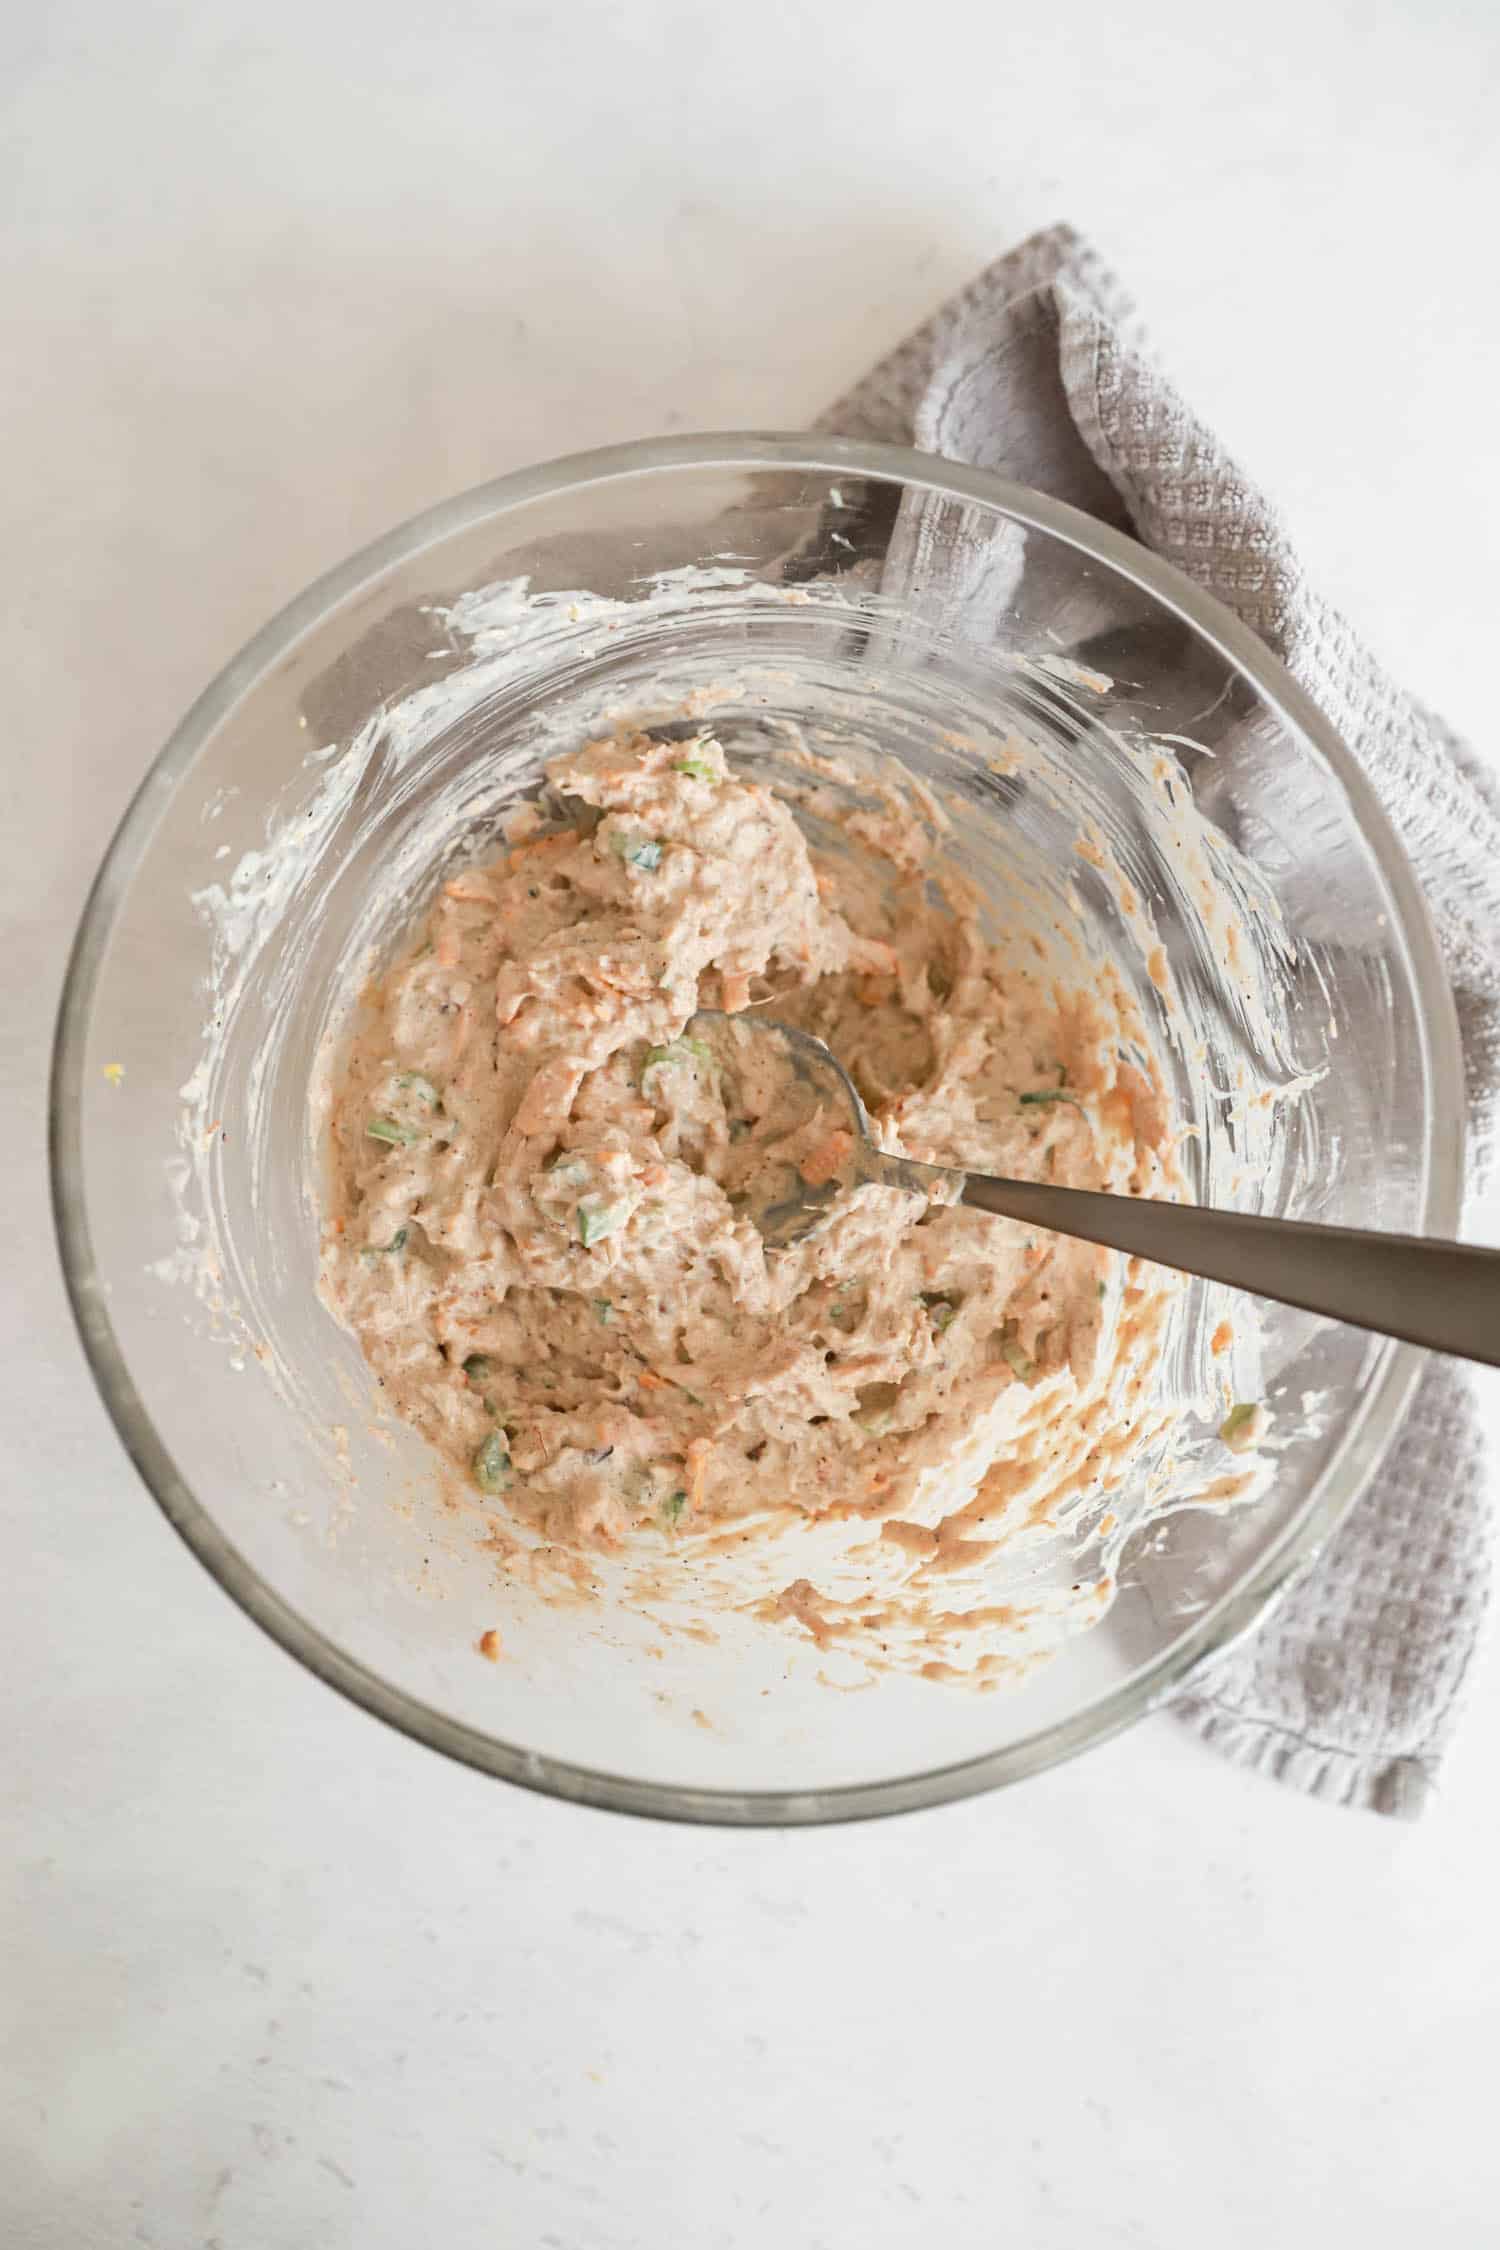 Unbaked crab dip stirred together in glass mixing bowl.